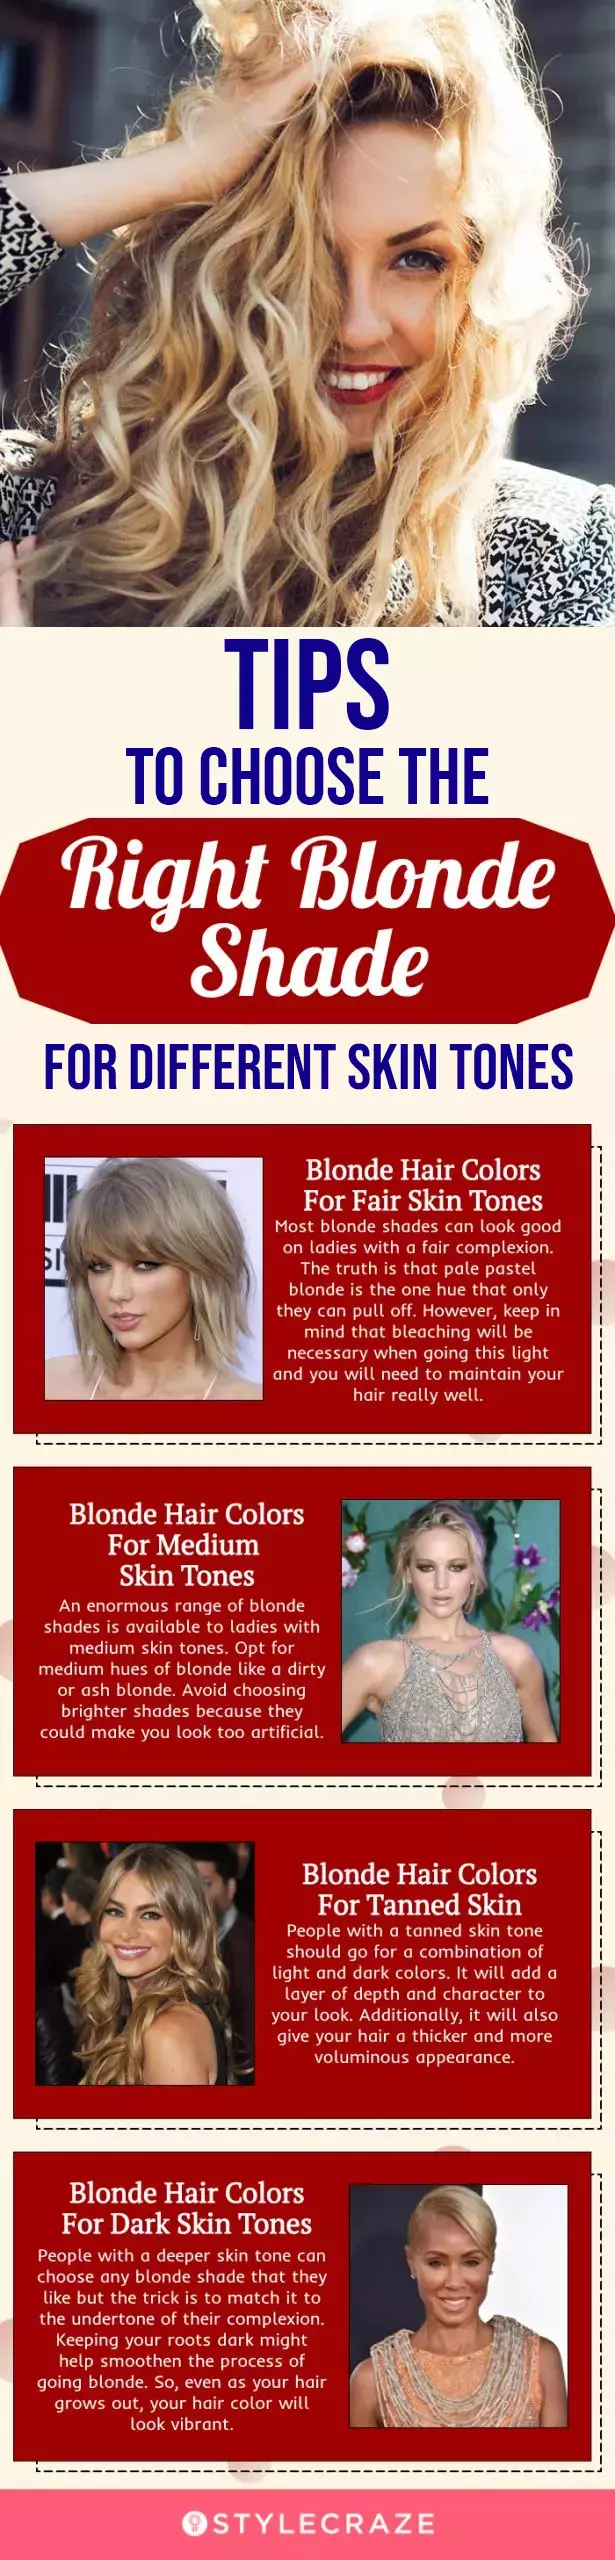 an easy guide to choosing the right blonde shade for different skin tones (infographic)